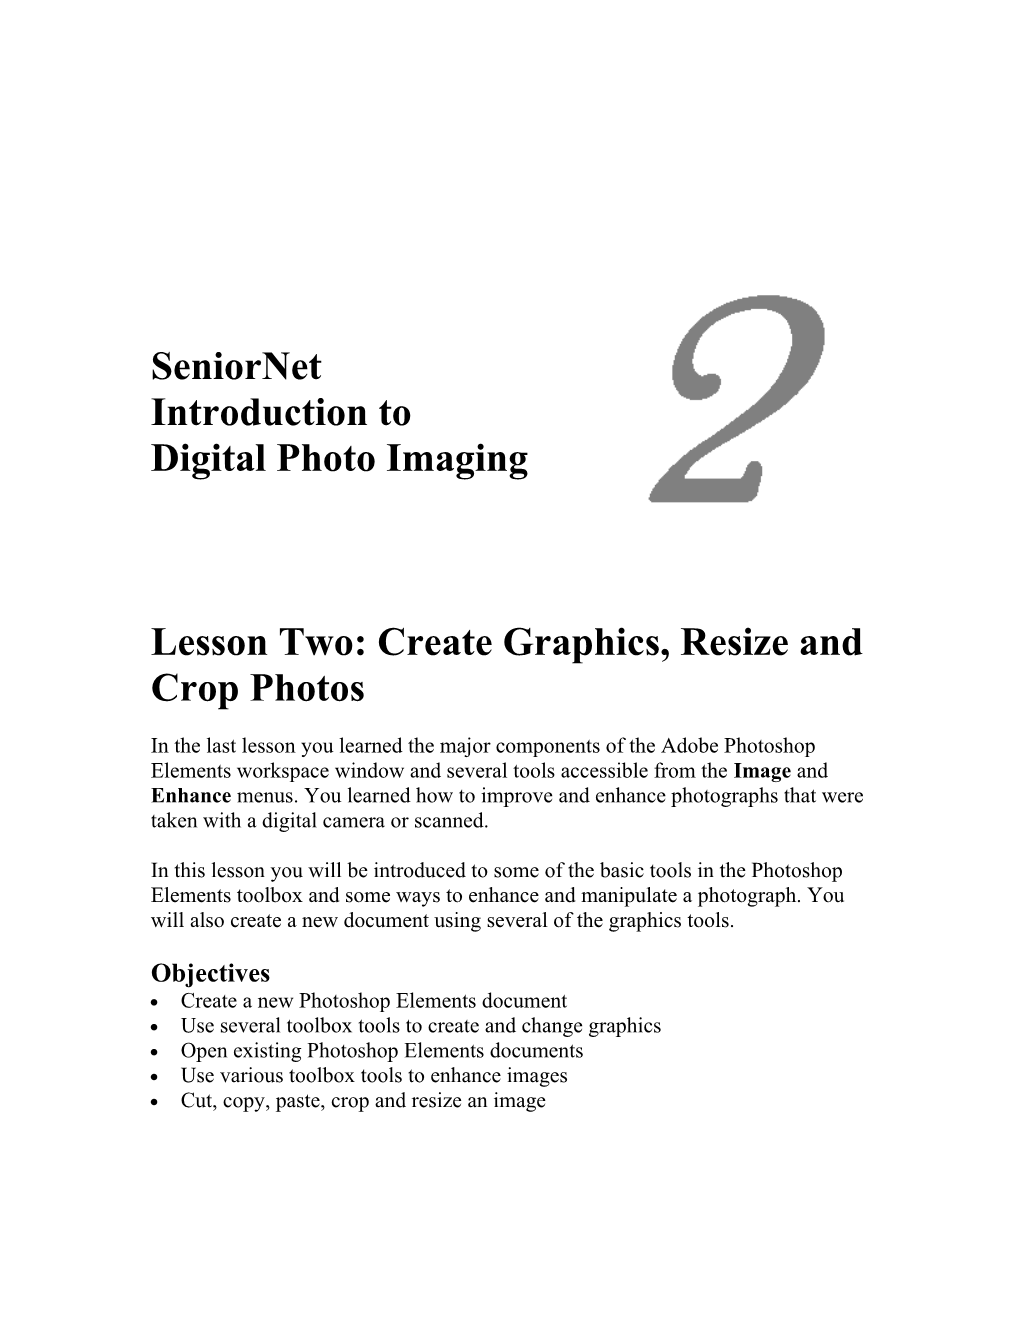 Lesson Two: Create Graphics, Resize and Crop Photos